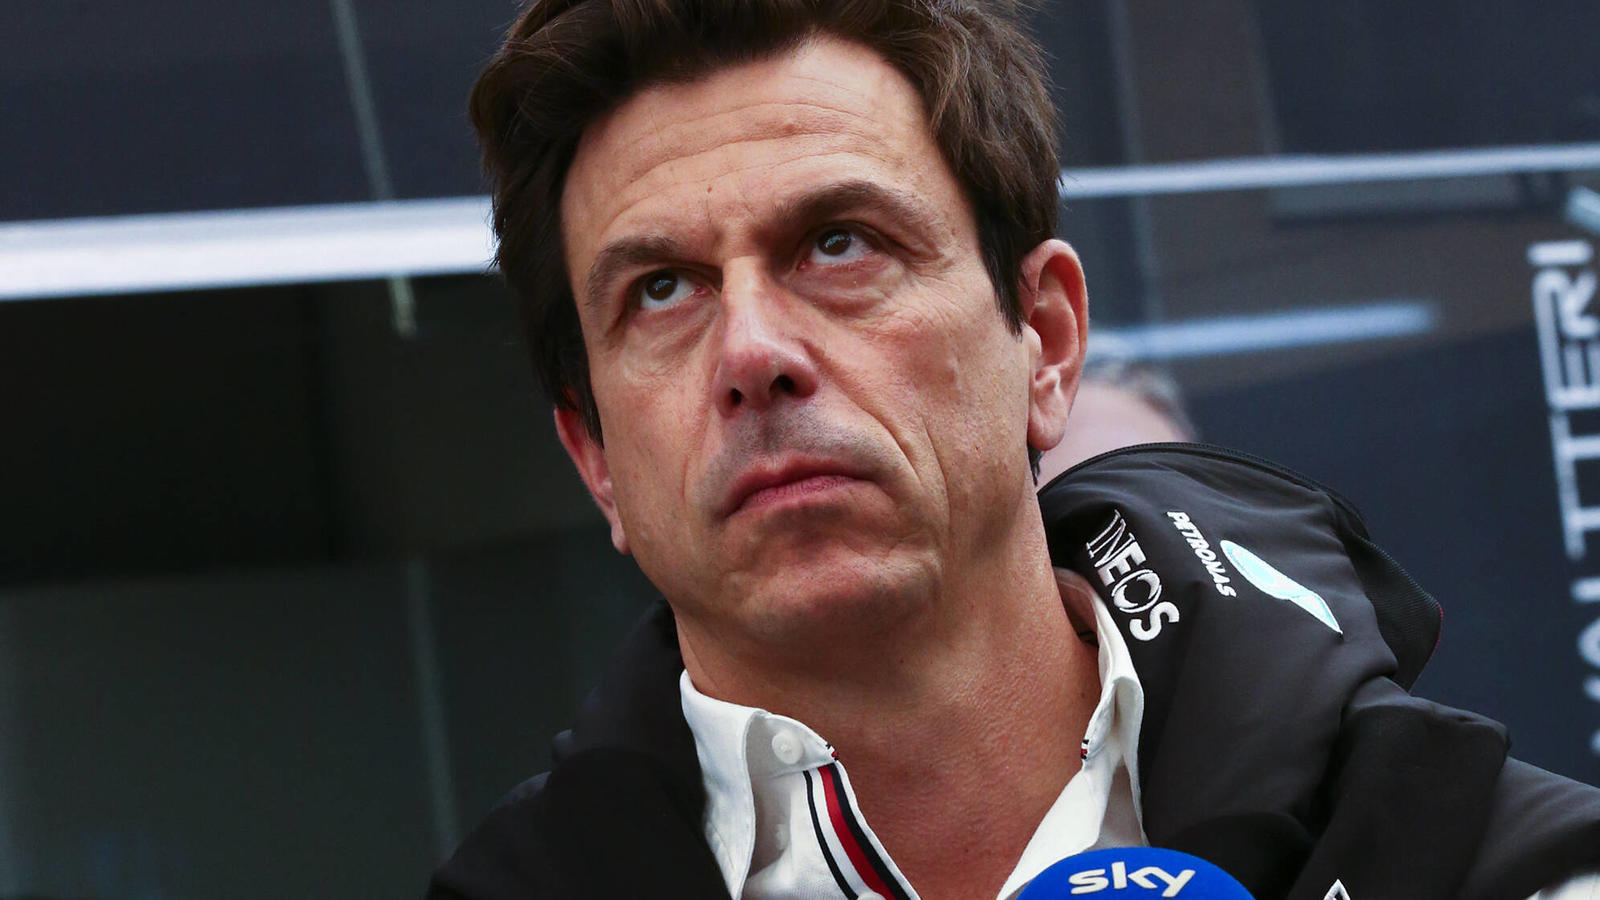 Formula 1 2021: Brazilian GP AUToDROMO JOS CARLOS PACE, BRAZIL - NOVEMBER 12: Toto Wolff, Team Principal and CEO, Mercedes AMG, is interviewed for Sky Sports F1 during the Brazilian GP at Autodromo Jos Carlos Pace on Friday November 12, 2021 in Sao P